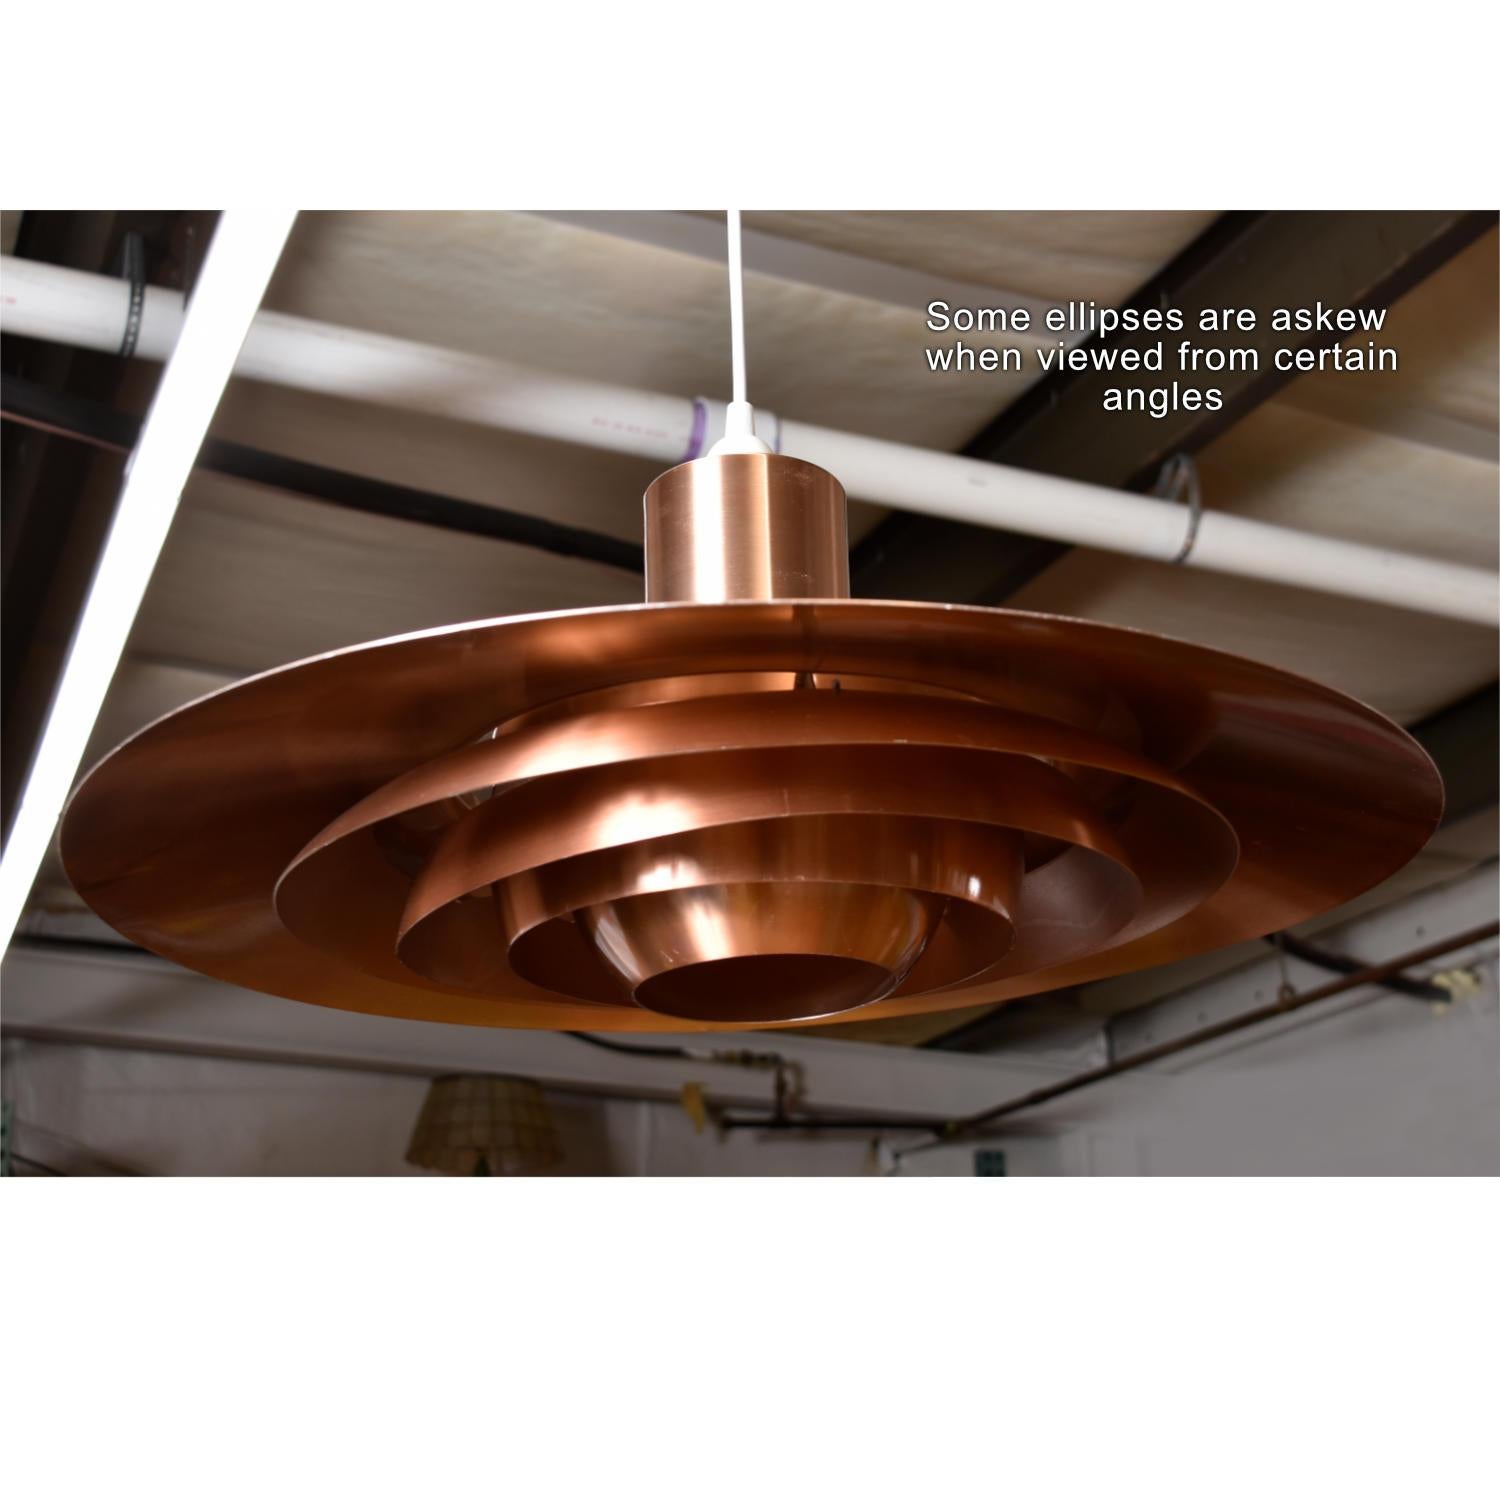 Vintage Preben Fabricius & Jørgen Kastholm multi-tiered copper color Danish pendant light. The fixture is intended to dangle from the ceiling. The copper colored metal shade is original. The electric components (light fixture and cord) are all new.